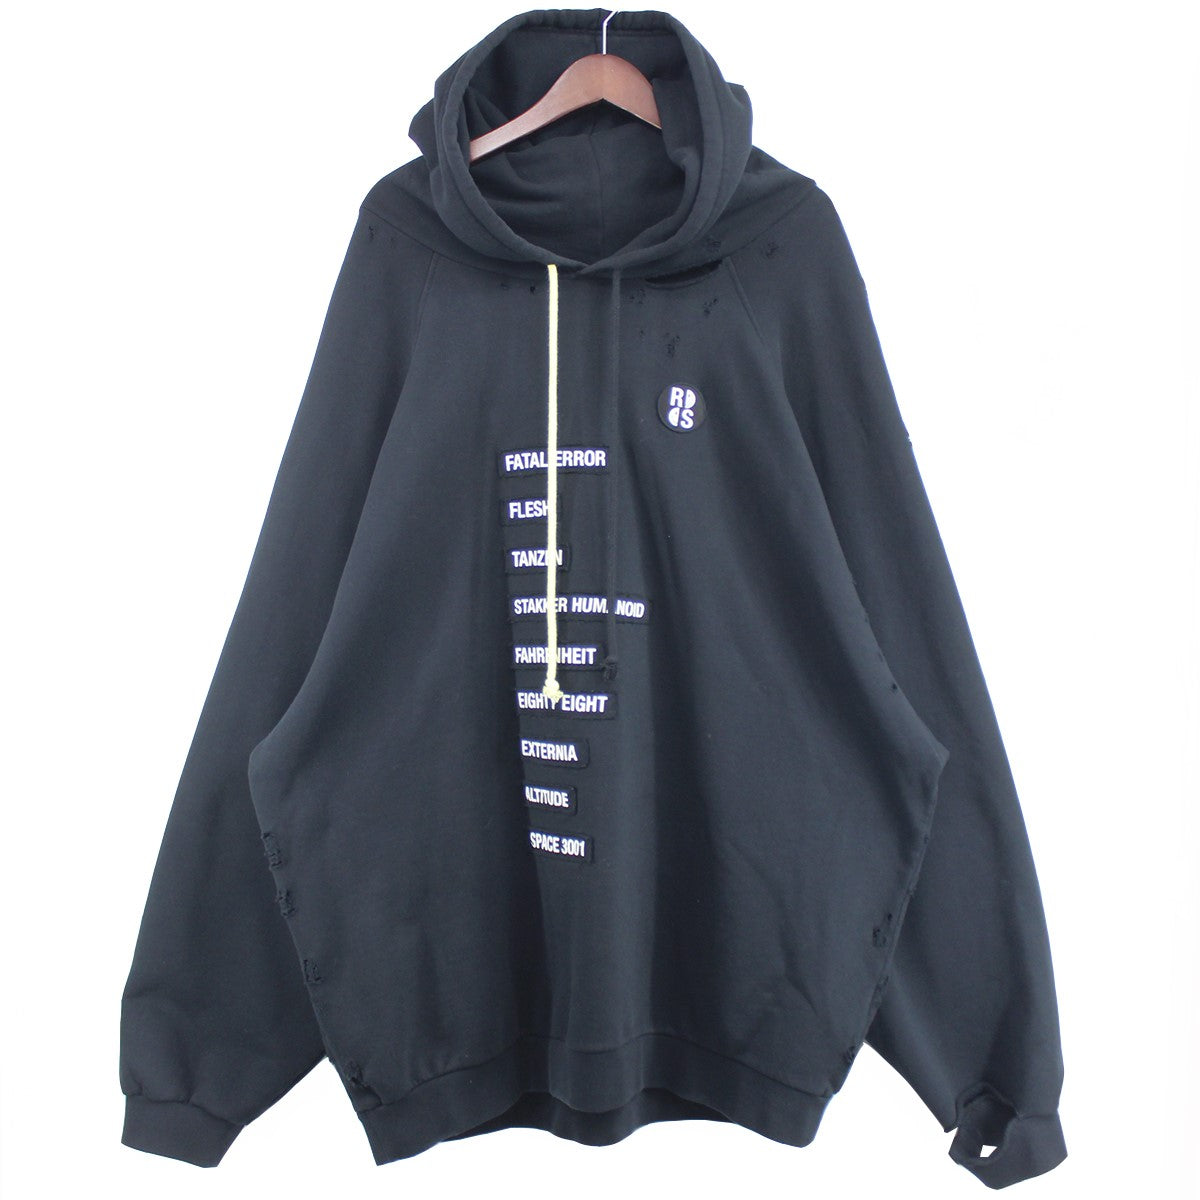 RAF SIMONS(ラフシモンズ) 22SS Big Fit Patched Hoodie スマイリー 